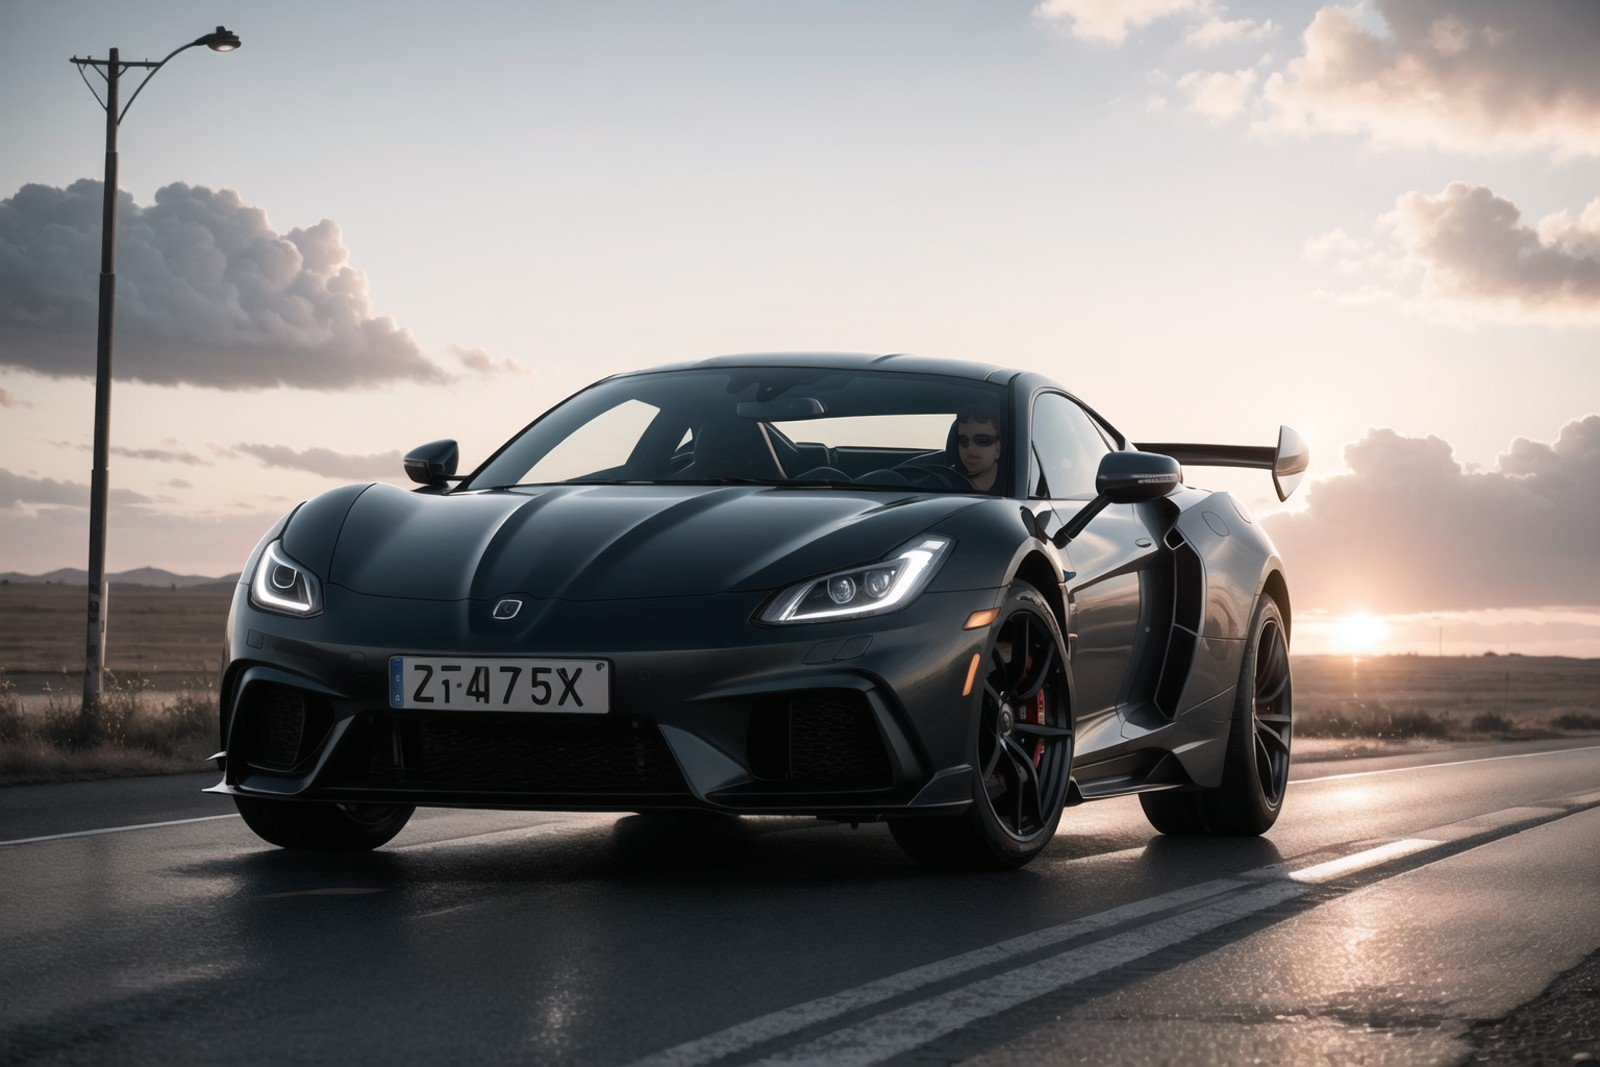 photo of a supercar, 8k uhd, high quality, road, sunset, motion blur, depth blur, cinematic, filmic image 4k, 8k with [George Miller's Mad Max style]. The image should be [ultra-realistic], with [high-resolution] captured in [natural light]. The lighting should create [soft shadows] and showcase the [raw] and [vibrant colors], volumetric dtx, depth blur, blurry background, bokeh, (motion blur:1.001)